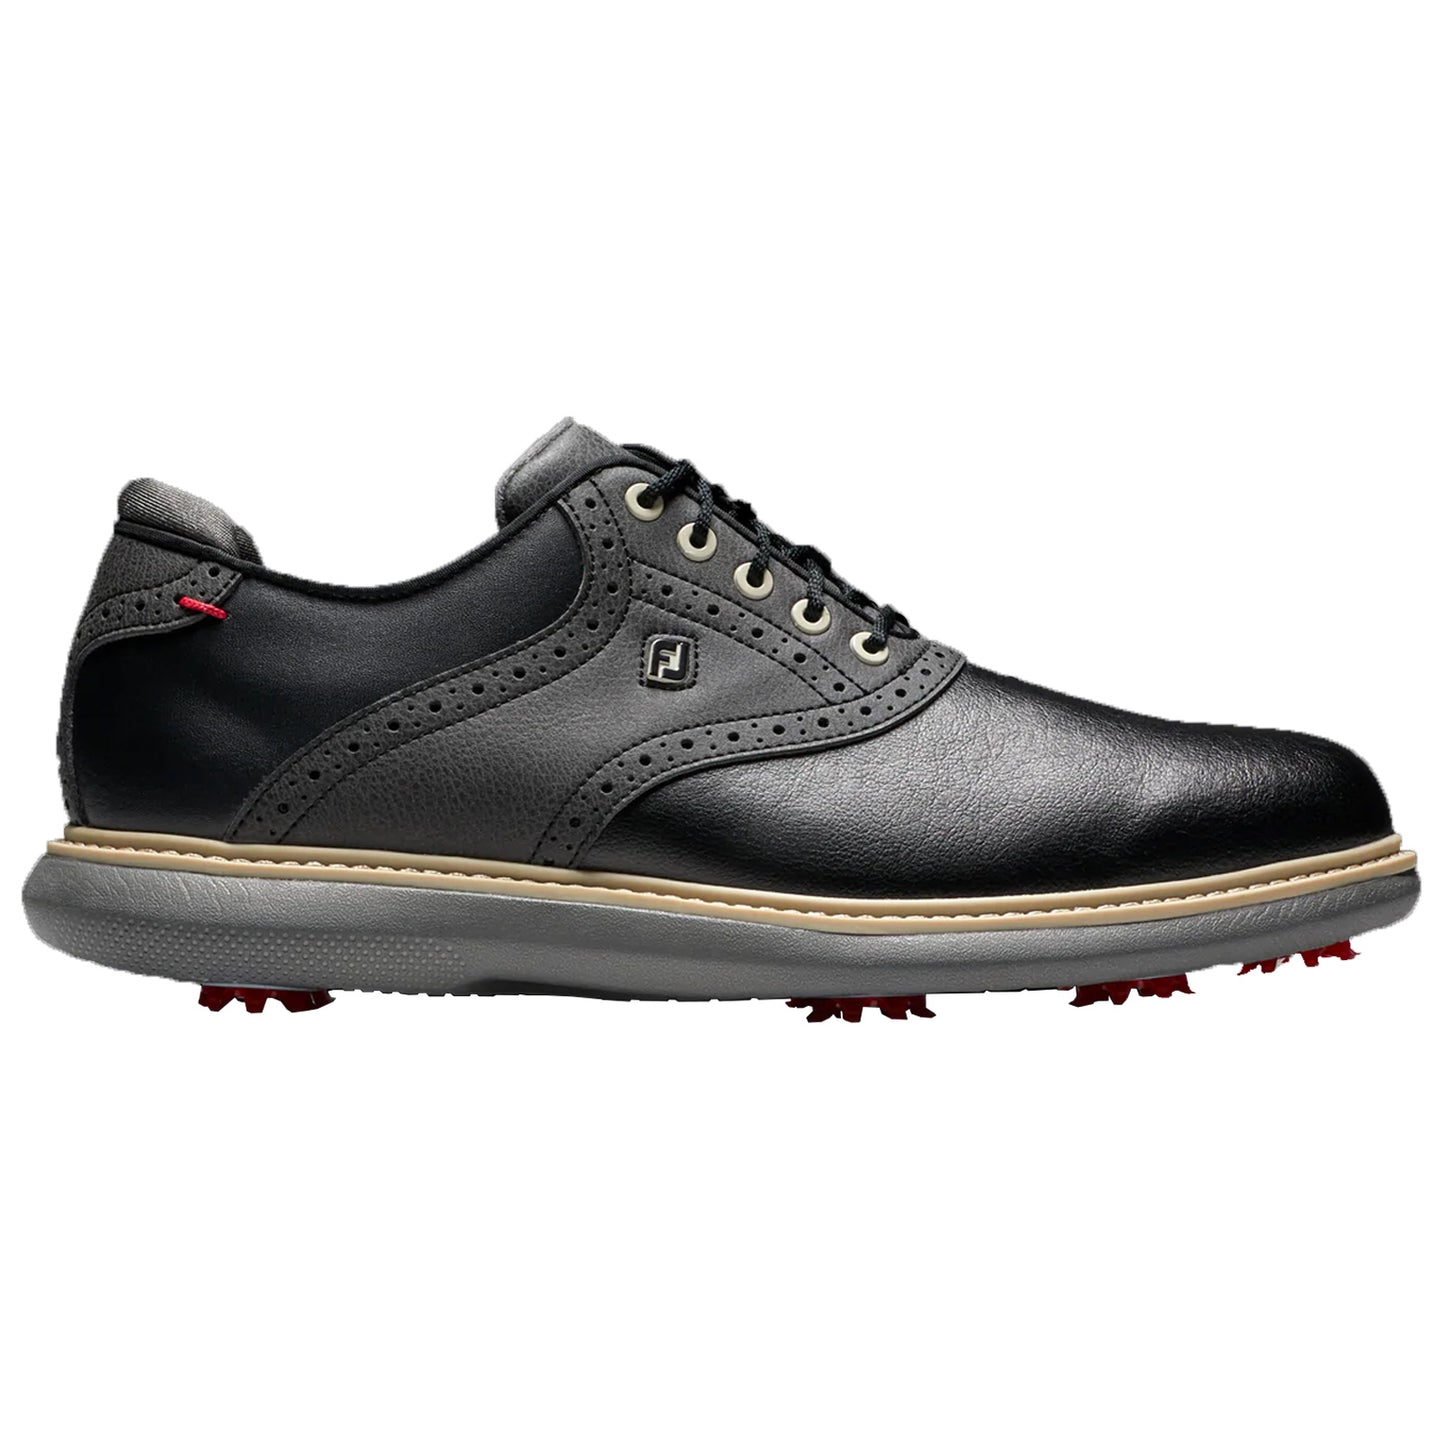 FootJoy Mens Traditions Golf Shoes - 6.5 UK Wide